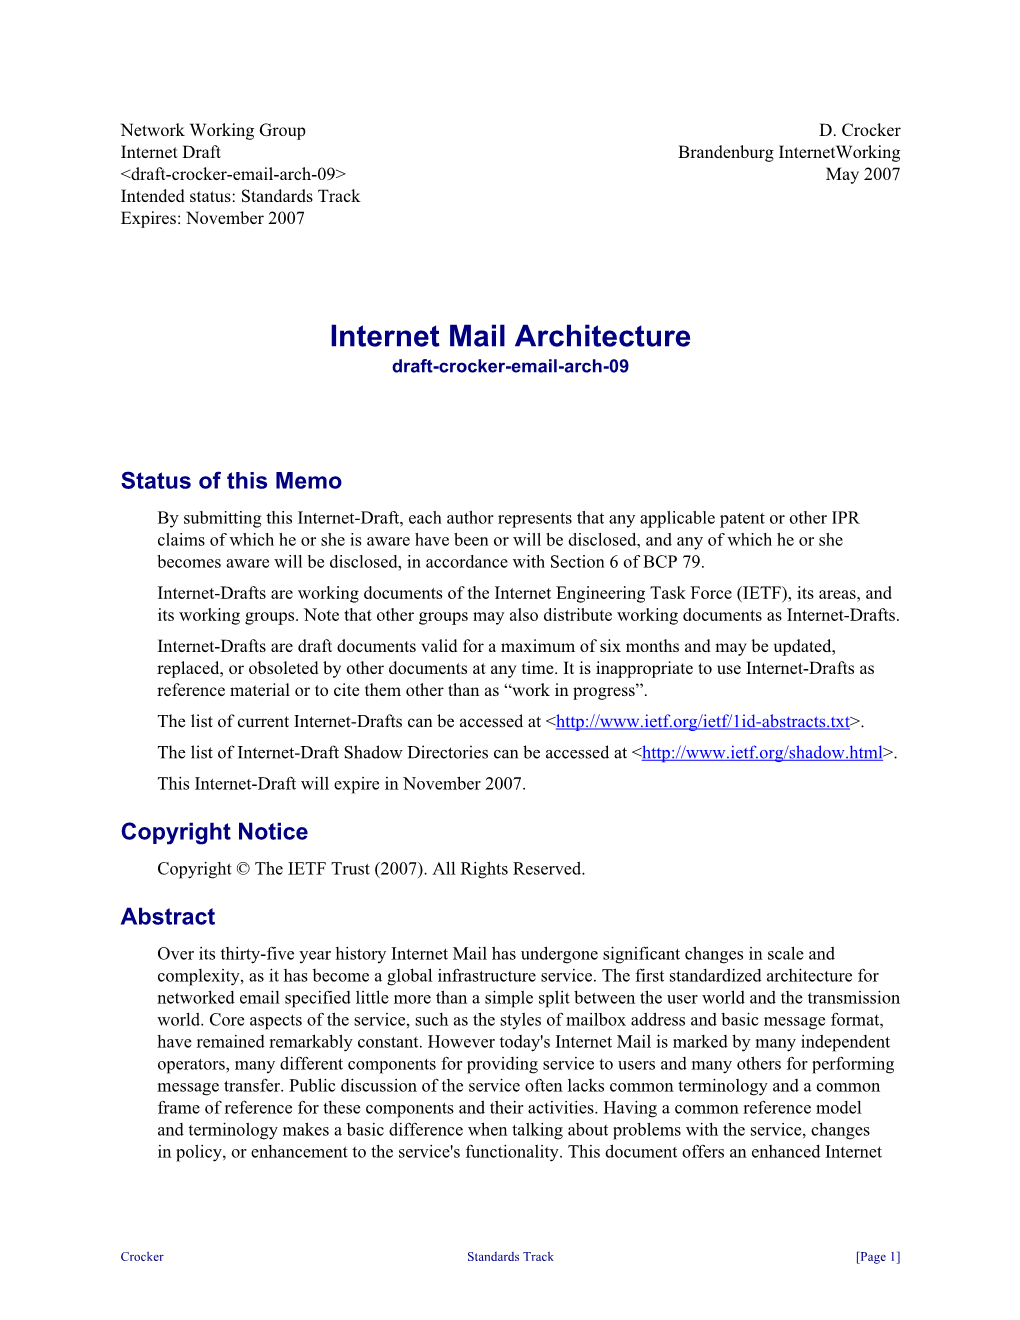 Internet Mail Architecture Draft-Crocker-Email-Arch-09